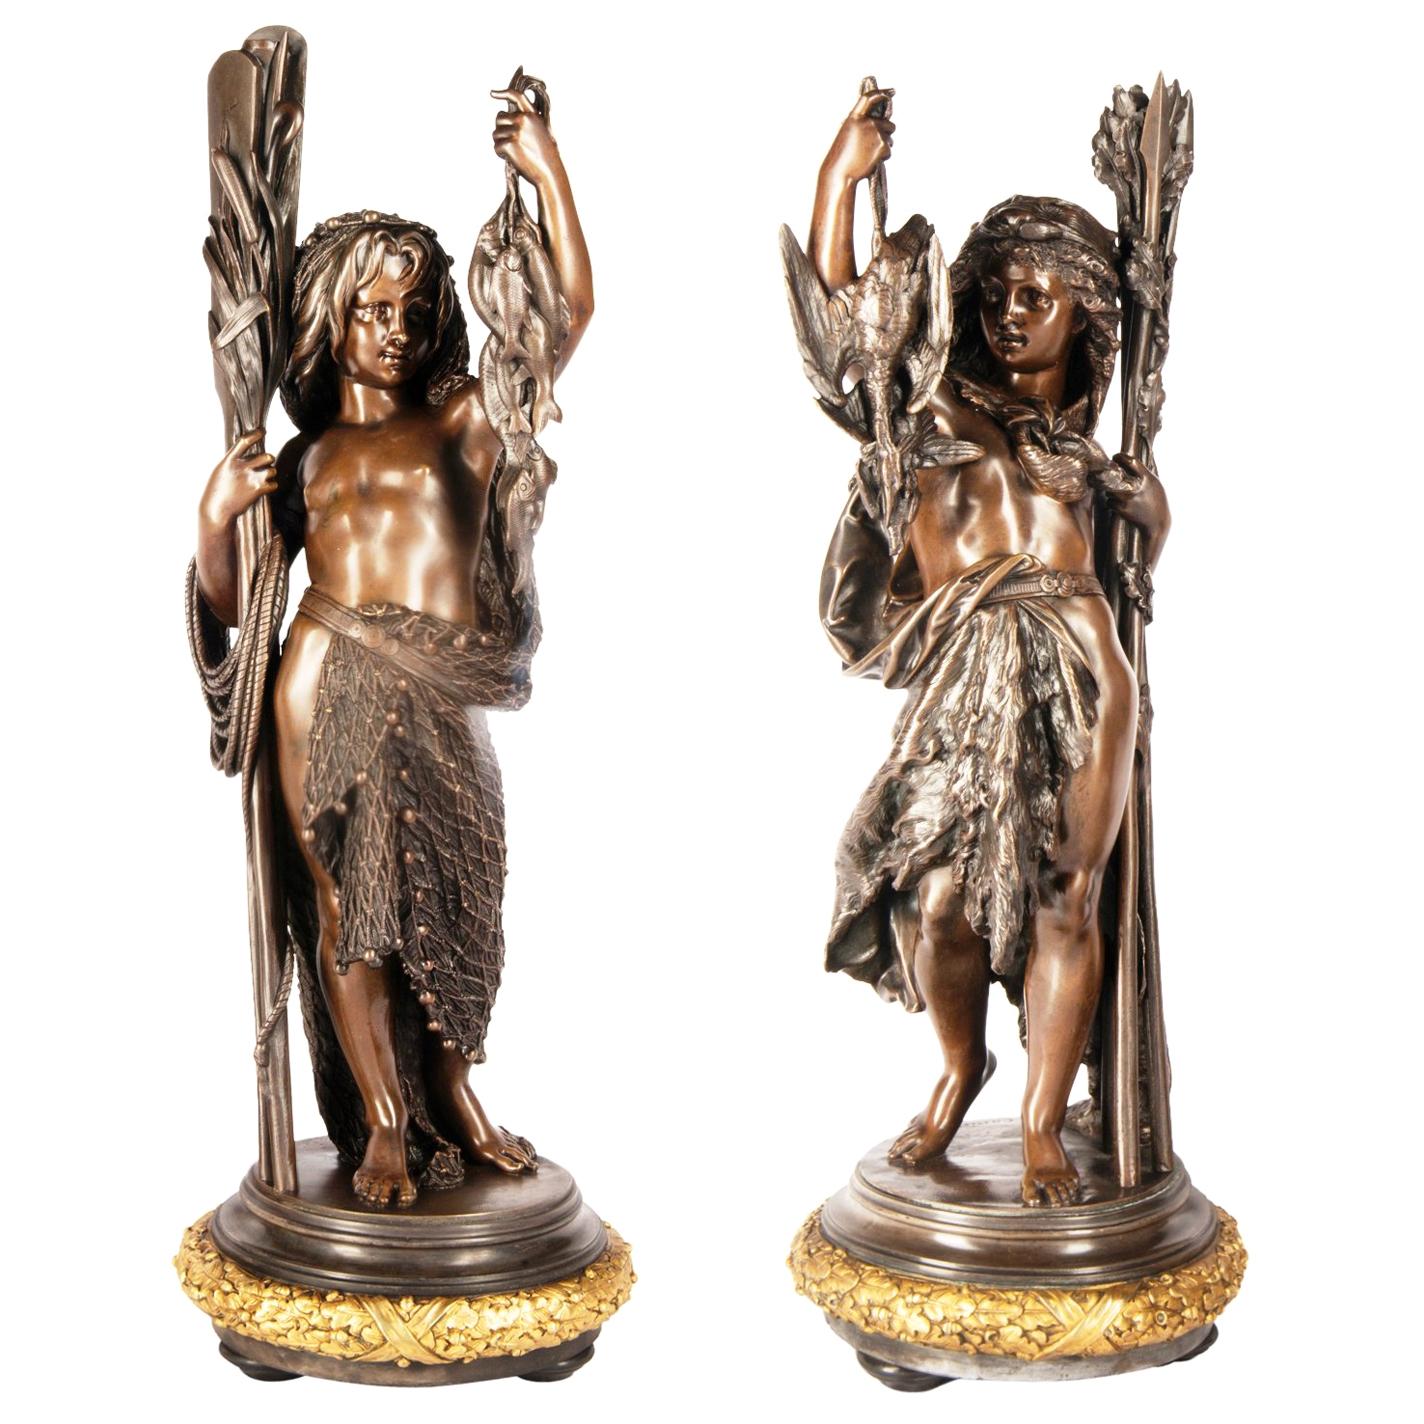 Bronze Figures by 'Carrier' of Hunting and Fishing, 19th Century